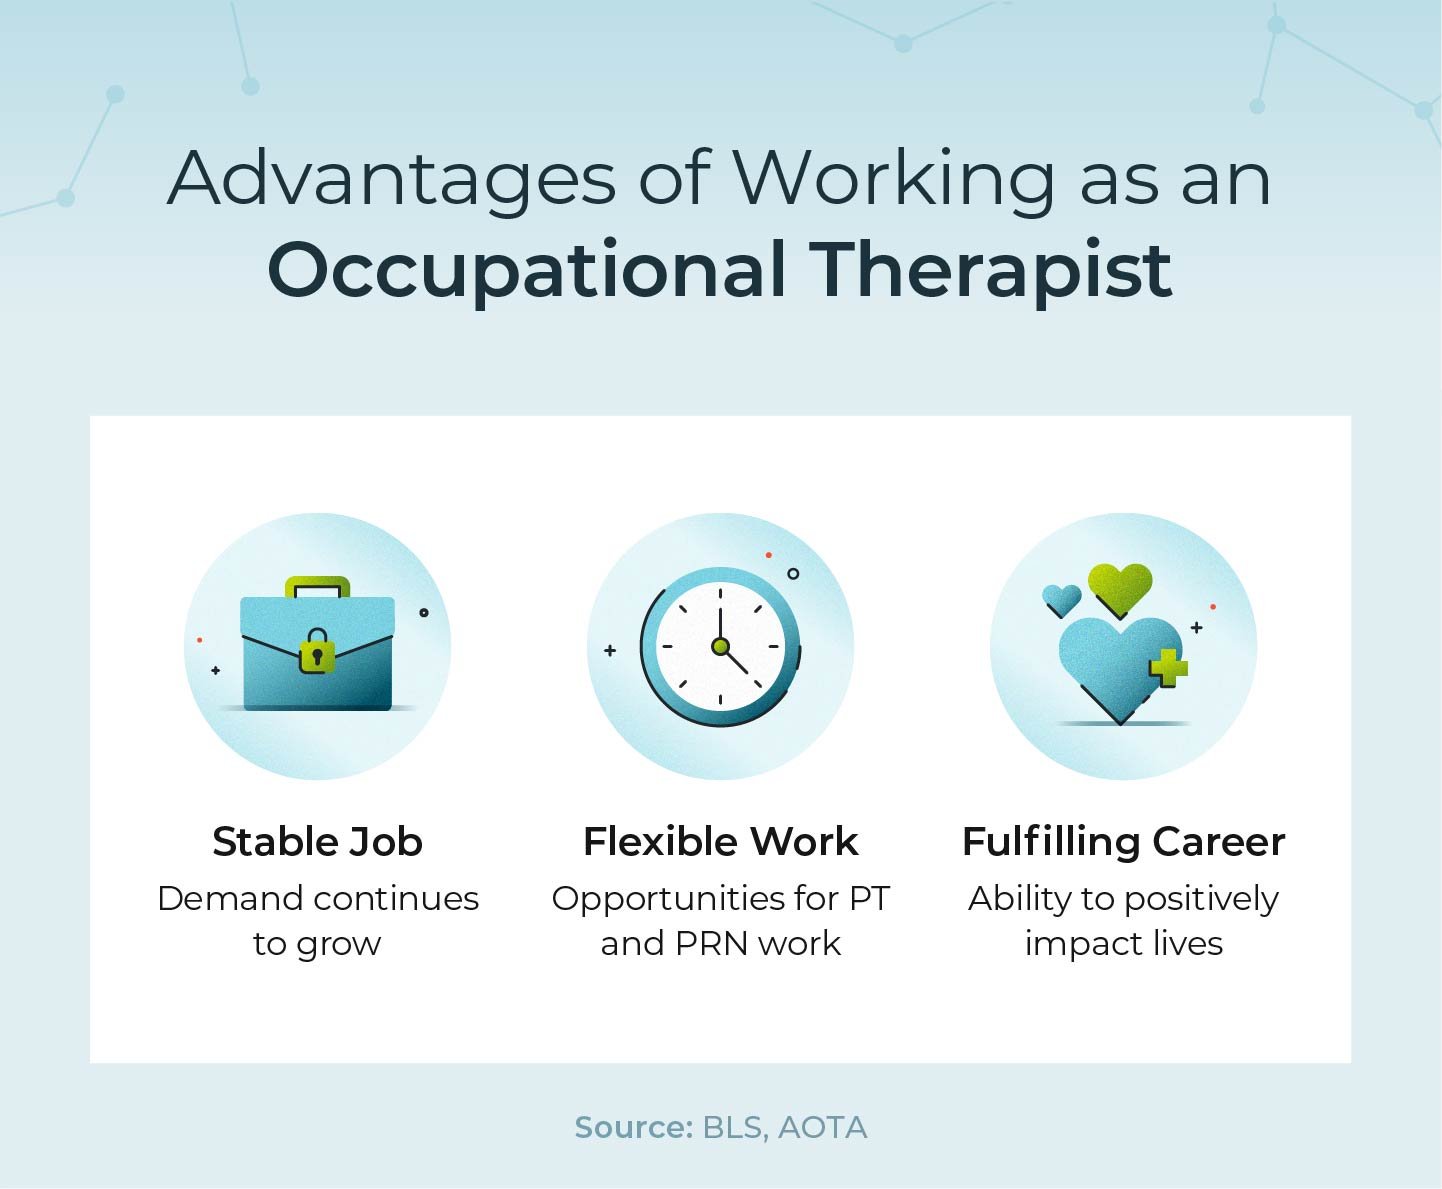 Benefits of working as an occupational therapist.